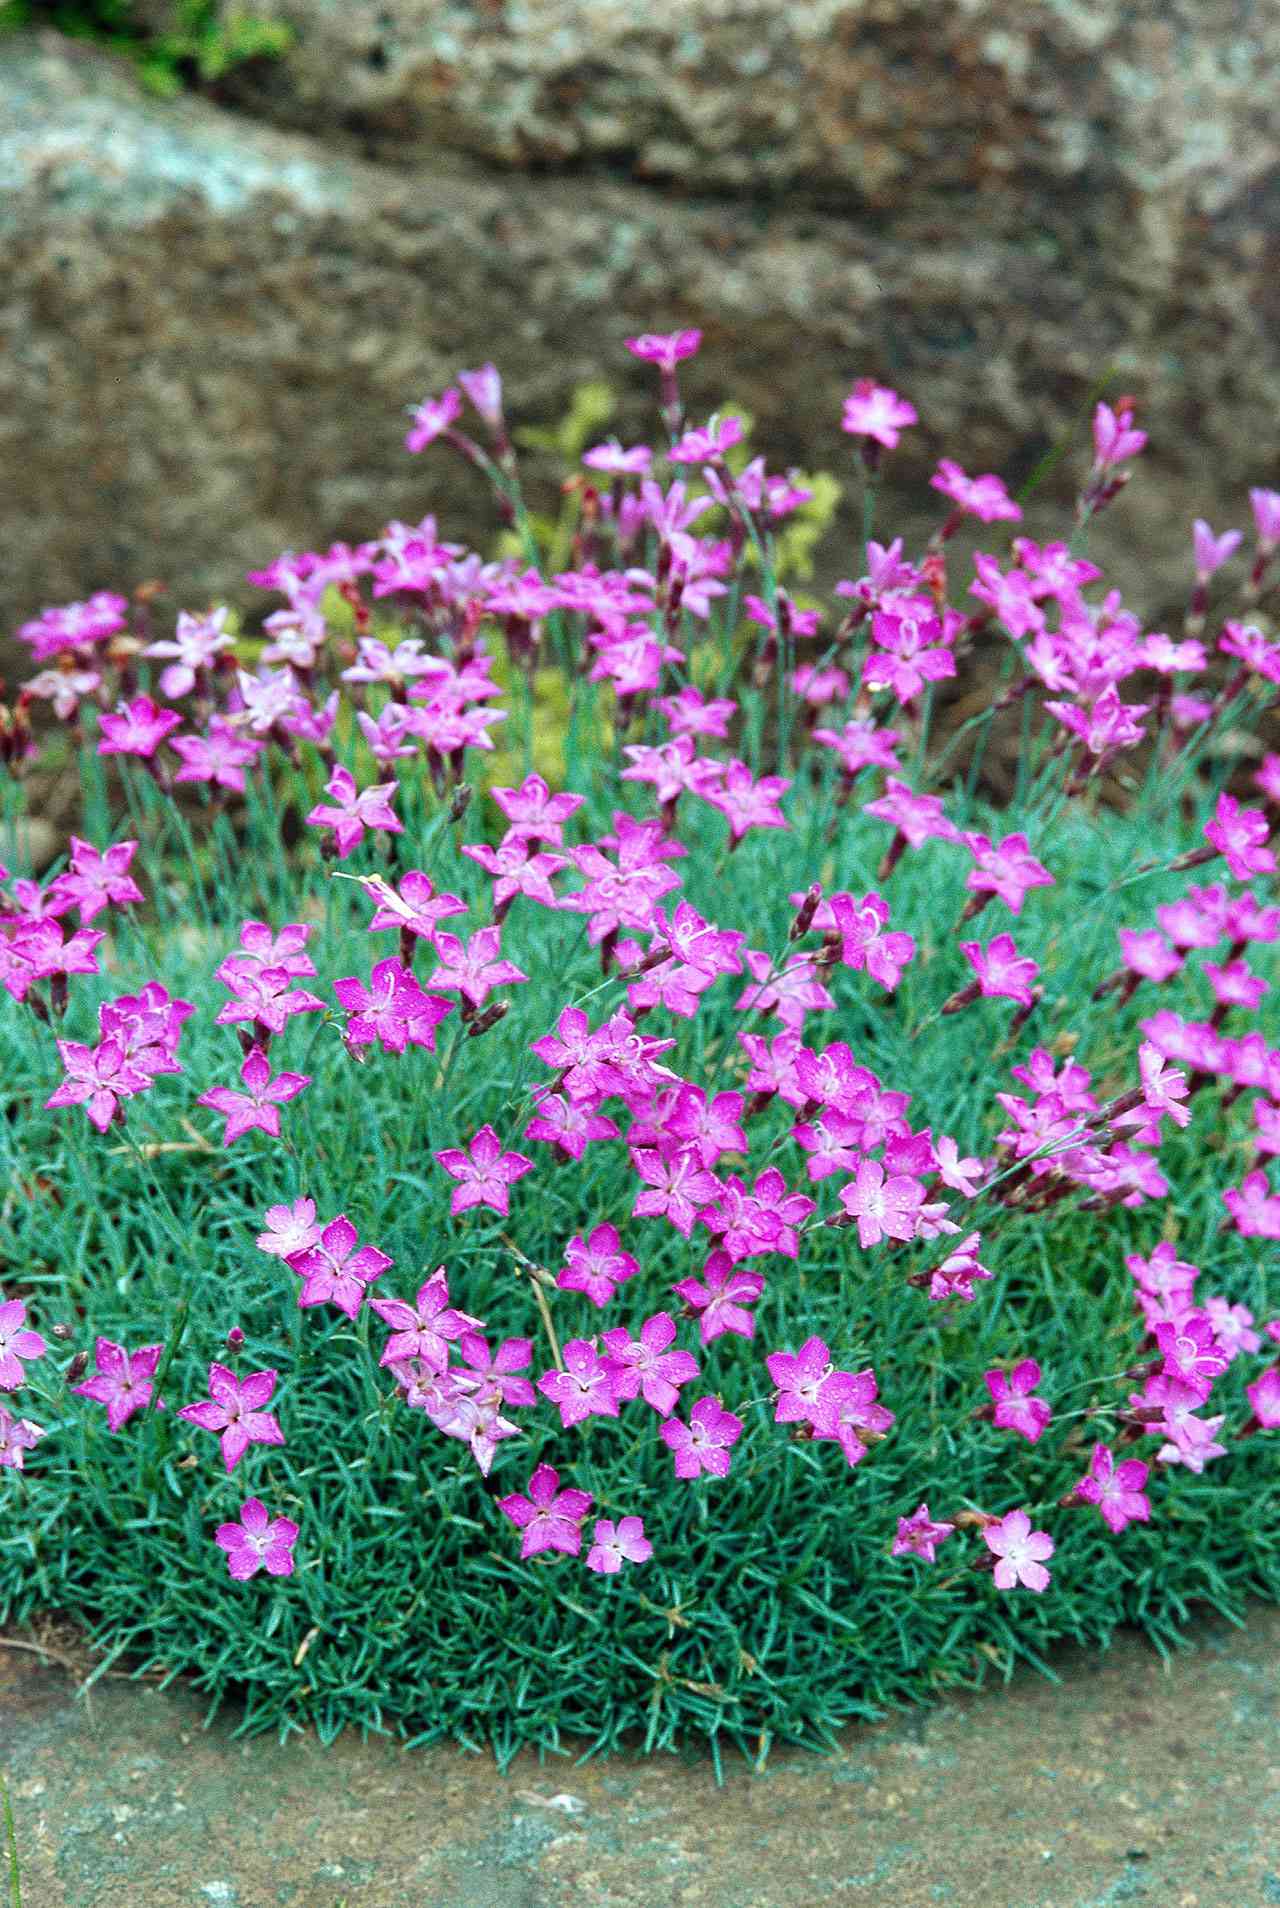 Drought Tolerant Groundcovers Better, Best Creeping Ground Cover